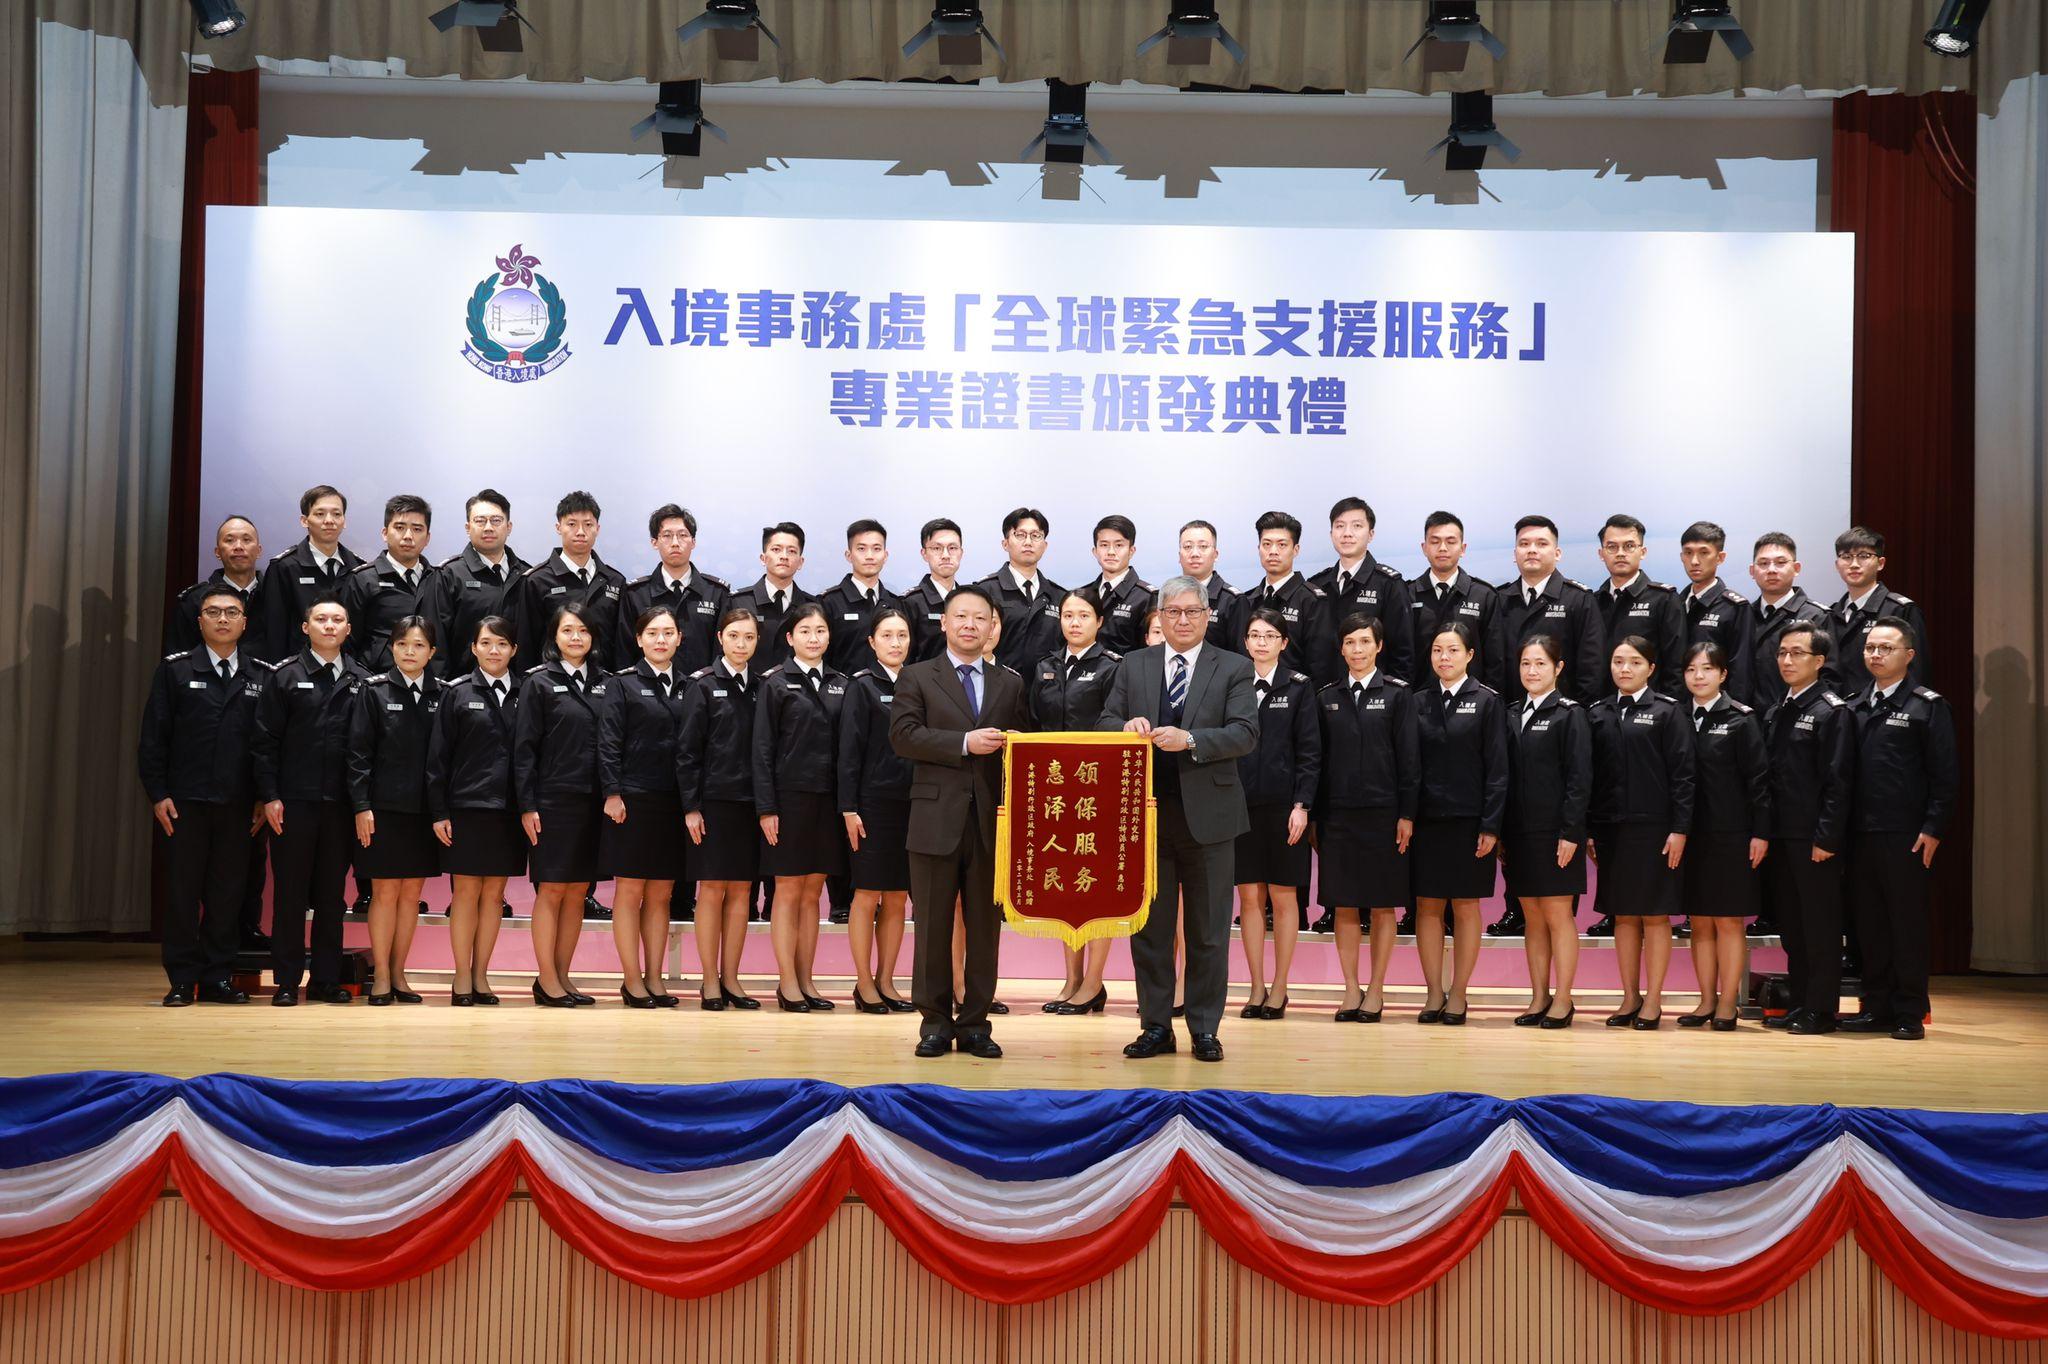 The Director of Immigration, Mr Au Ka-wang (front row, right), presents a silk banner to the Deputy Director-General of the Consular Department, Office of the Commissioner of the Ministry of Foreign Affairs in the Hong Kong Special Administrative Region, Mr Zheng Jie (front row, left), at the certificate presentation ceremony for "Professional Certificate in Worldwide Emergency Assistance Services for Immigration Service Members" today (March 28).